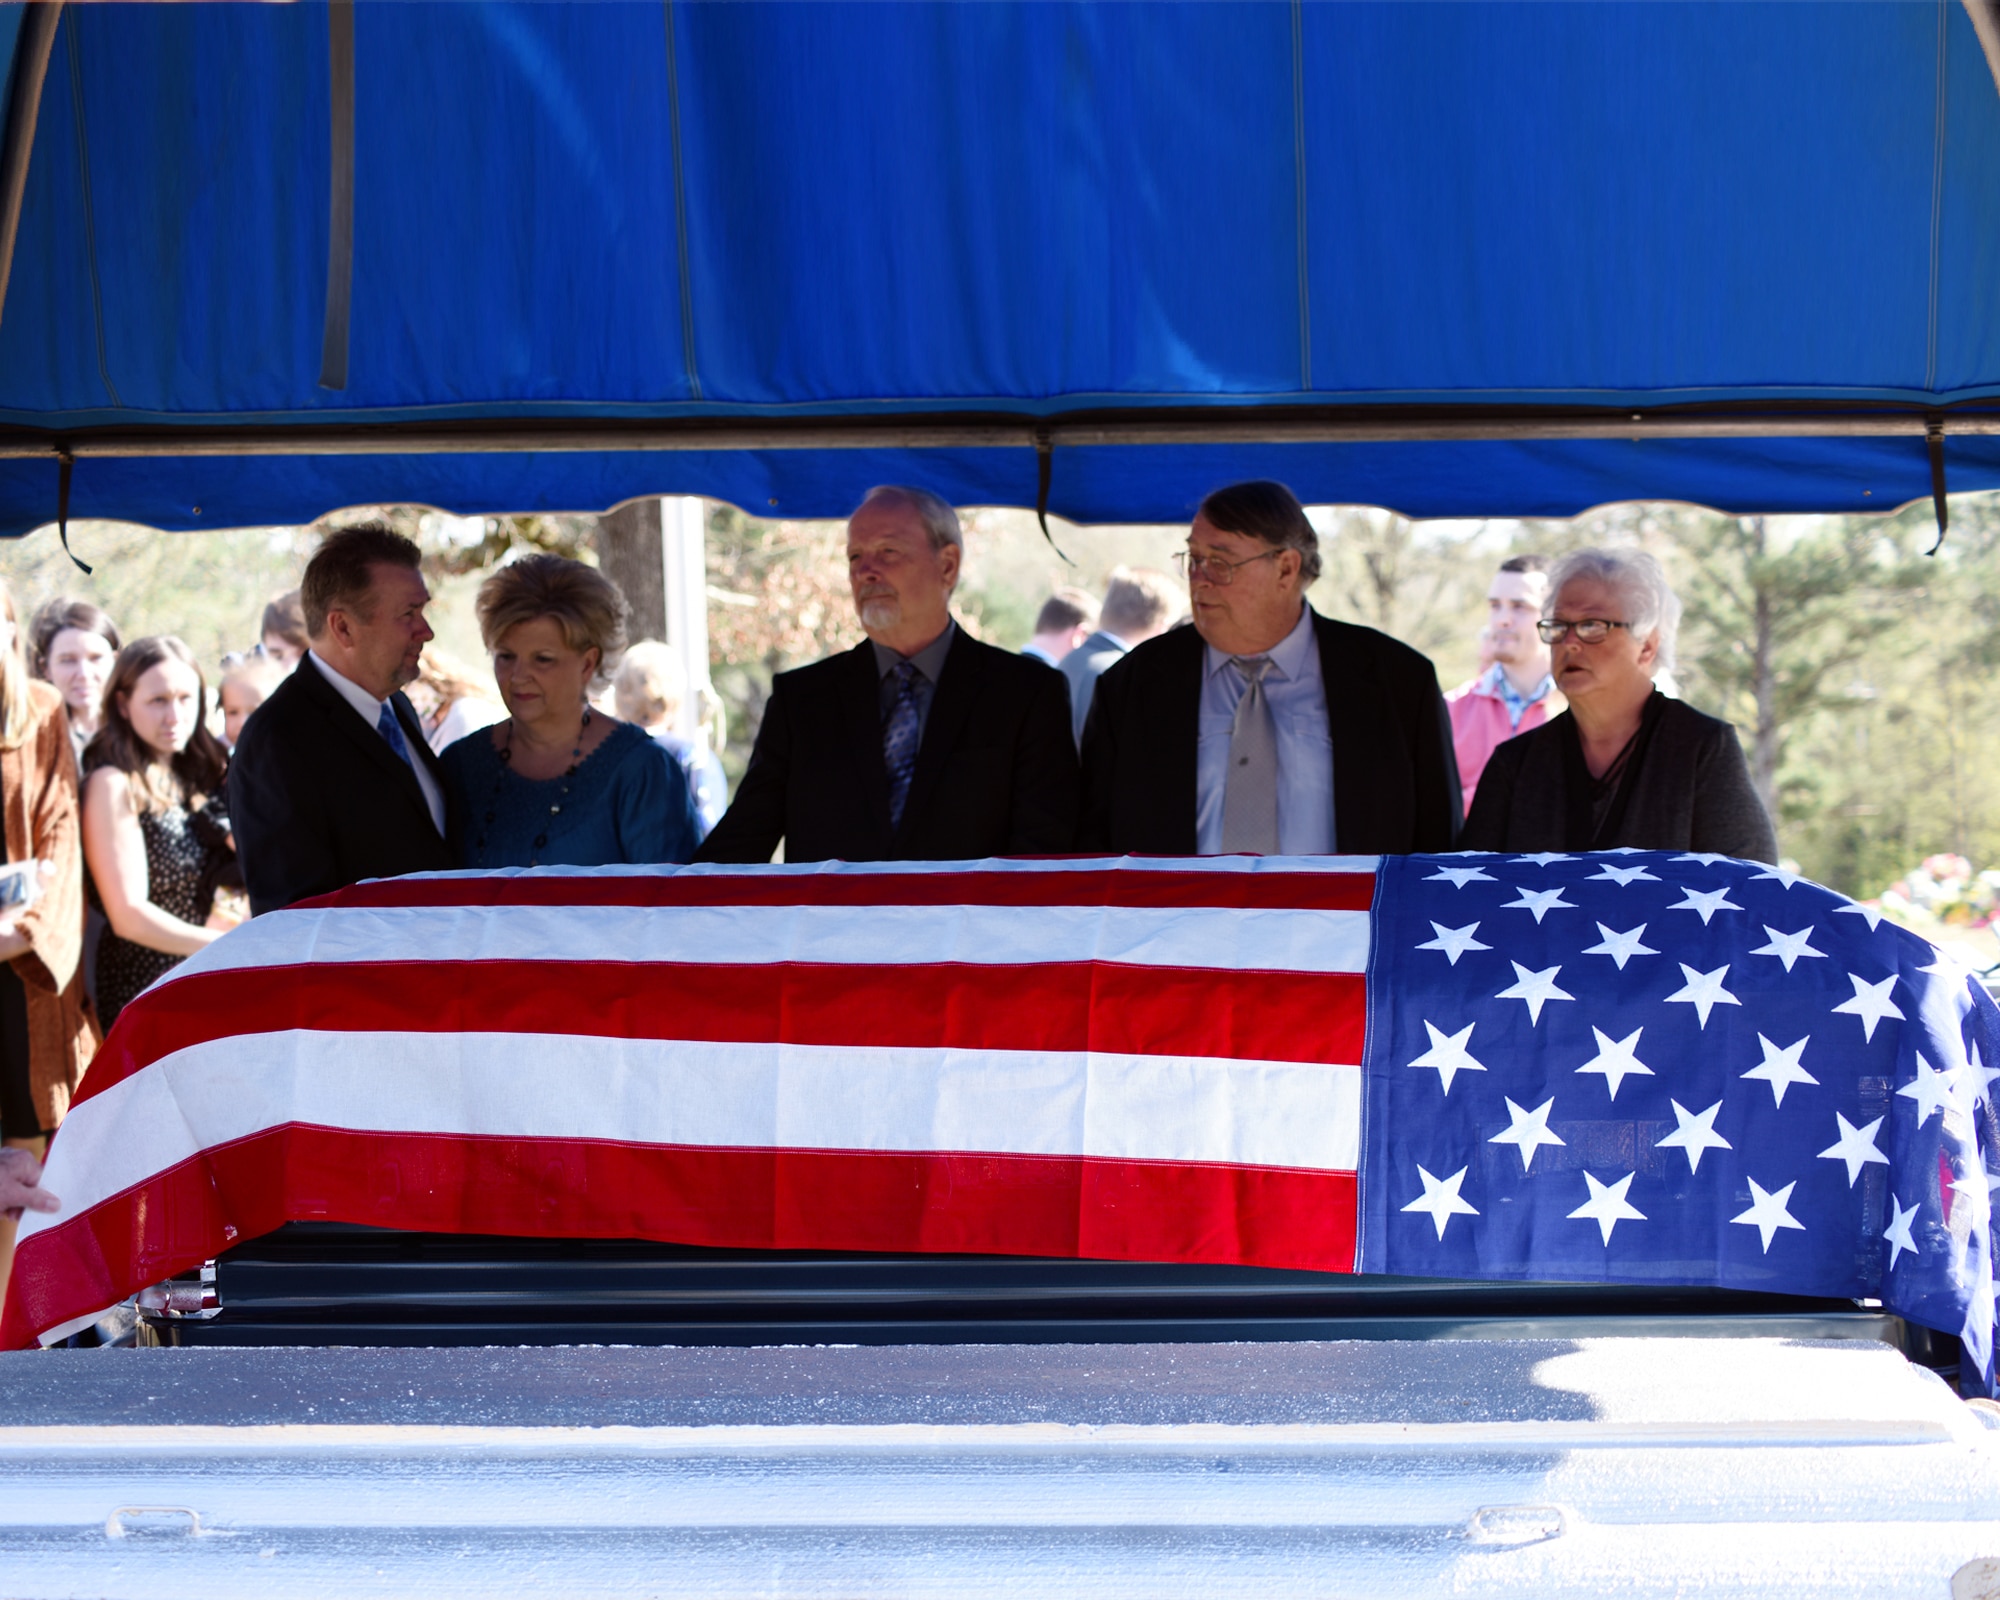 The sons and daughters of John Cockerham, a local World War II veteran, stand by his casket March 16, 2019, at Center Hill Baptist Church Cemetery in Hamilton, Mississippi. At the funeral, members from the Columbus Air Force Base Honor Guard performed a rifle salute, played taps, folded and presented an American flag to his wife, Georgia Mae. (U.S. Air Force photo by Sharon Ybarra)